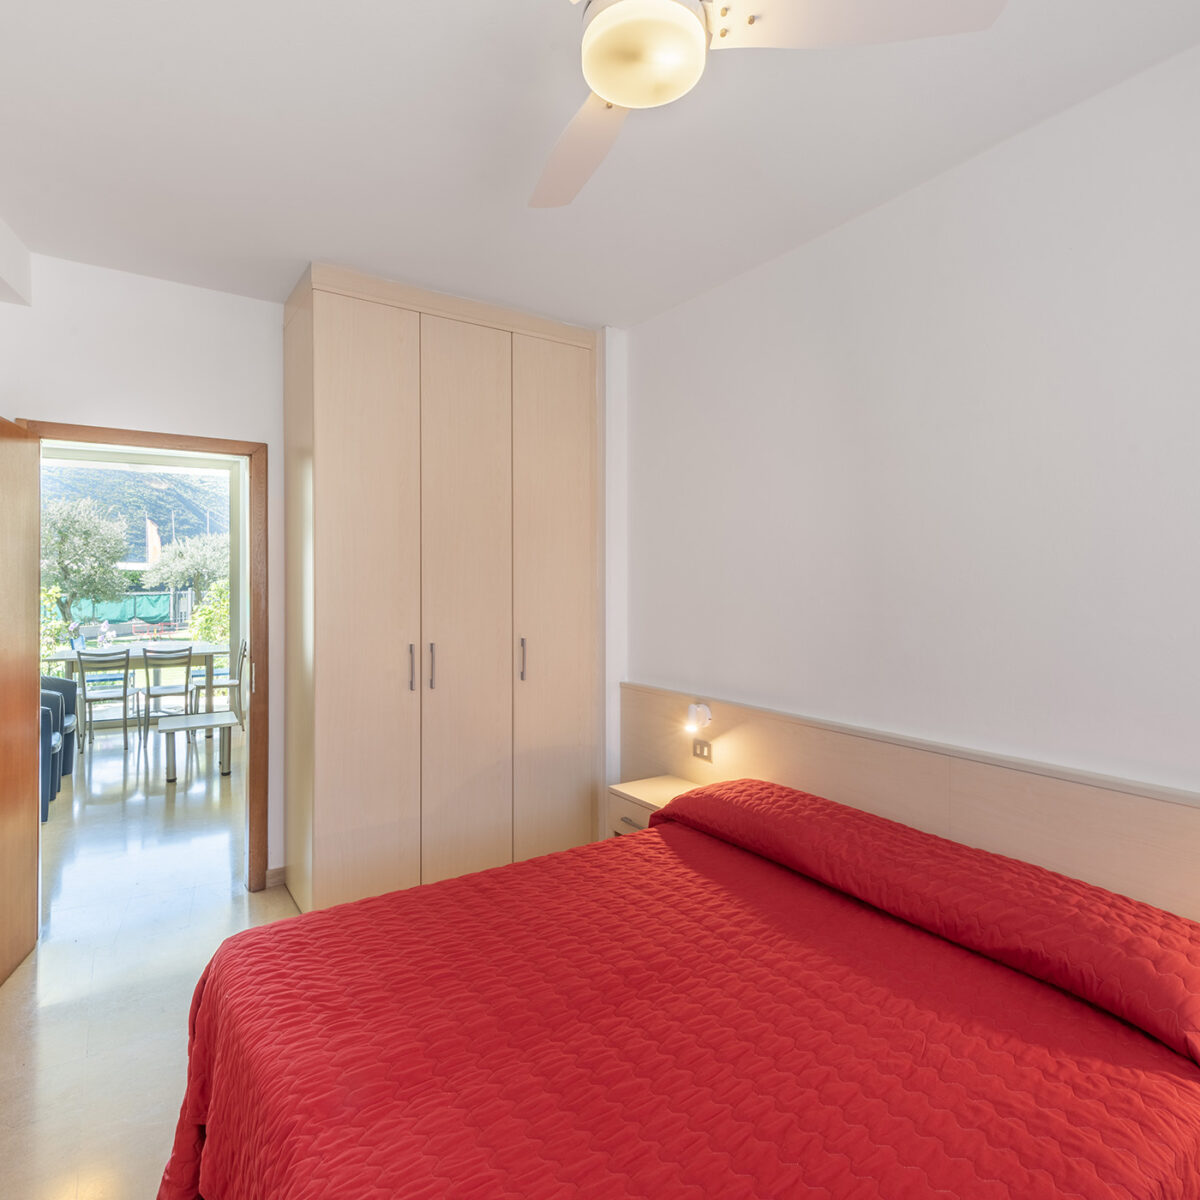 This spacious apartment includes a bedroom with a double bed